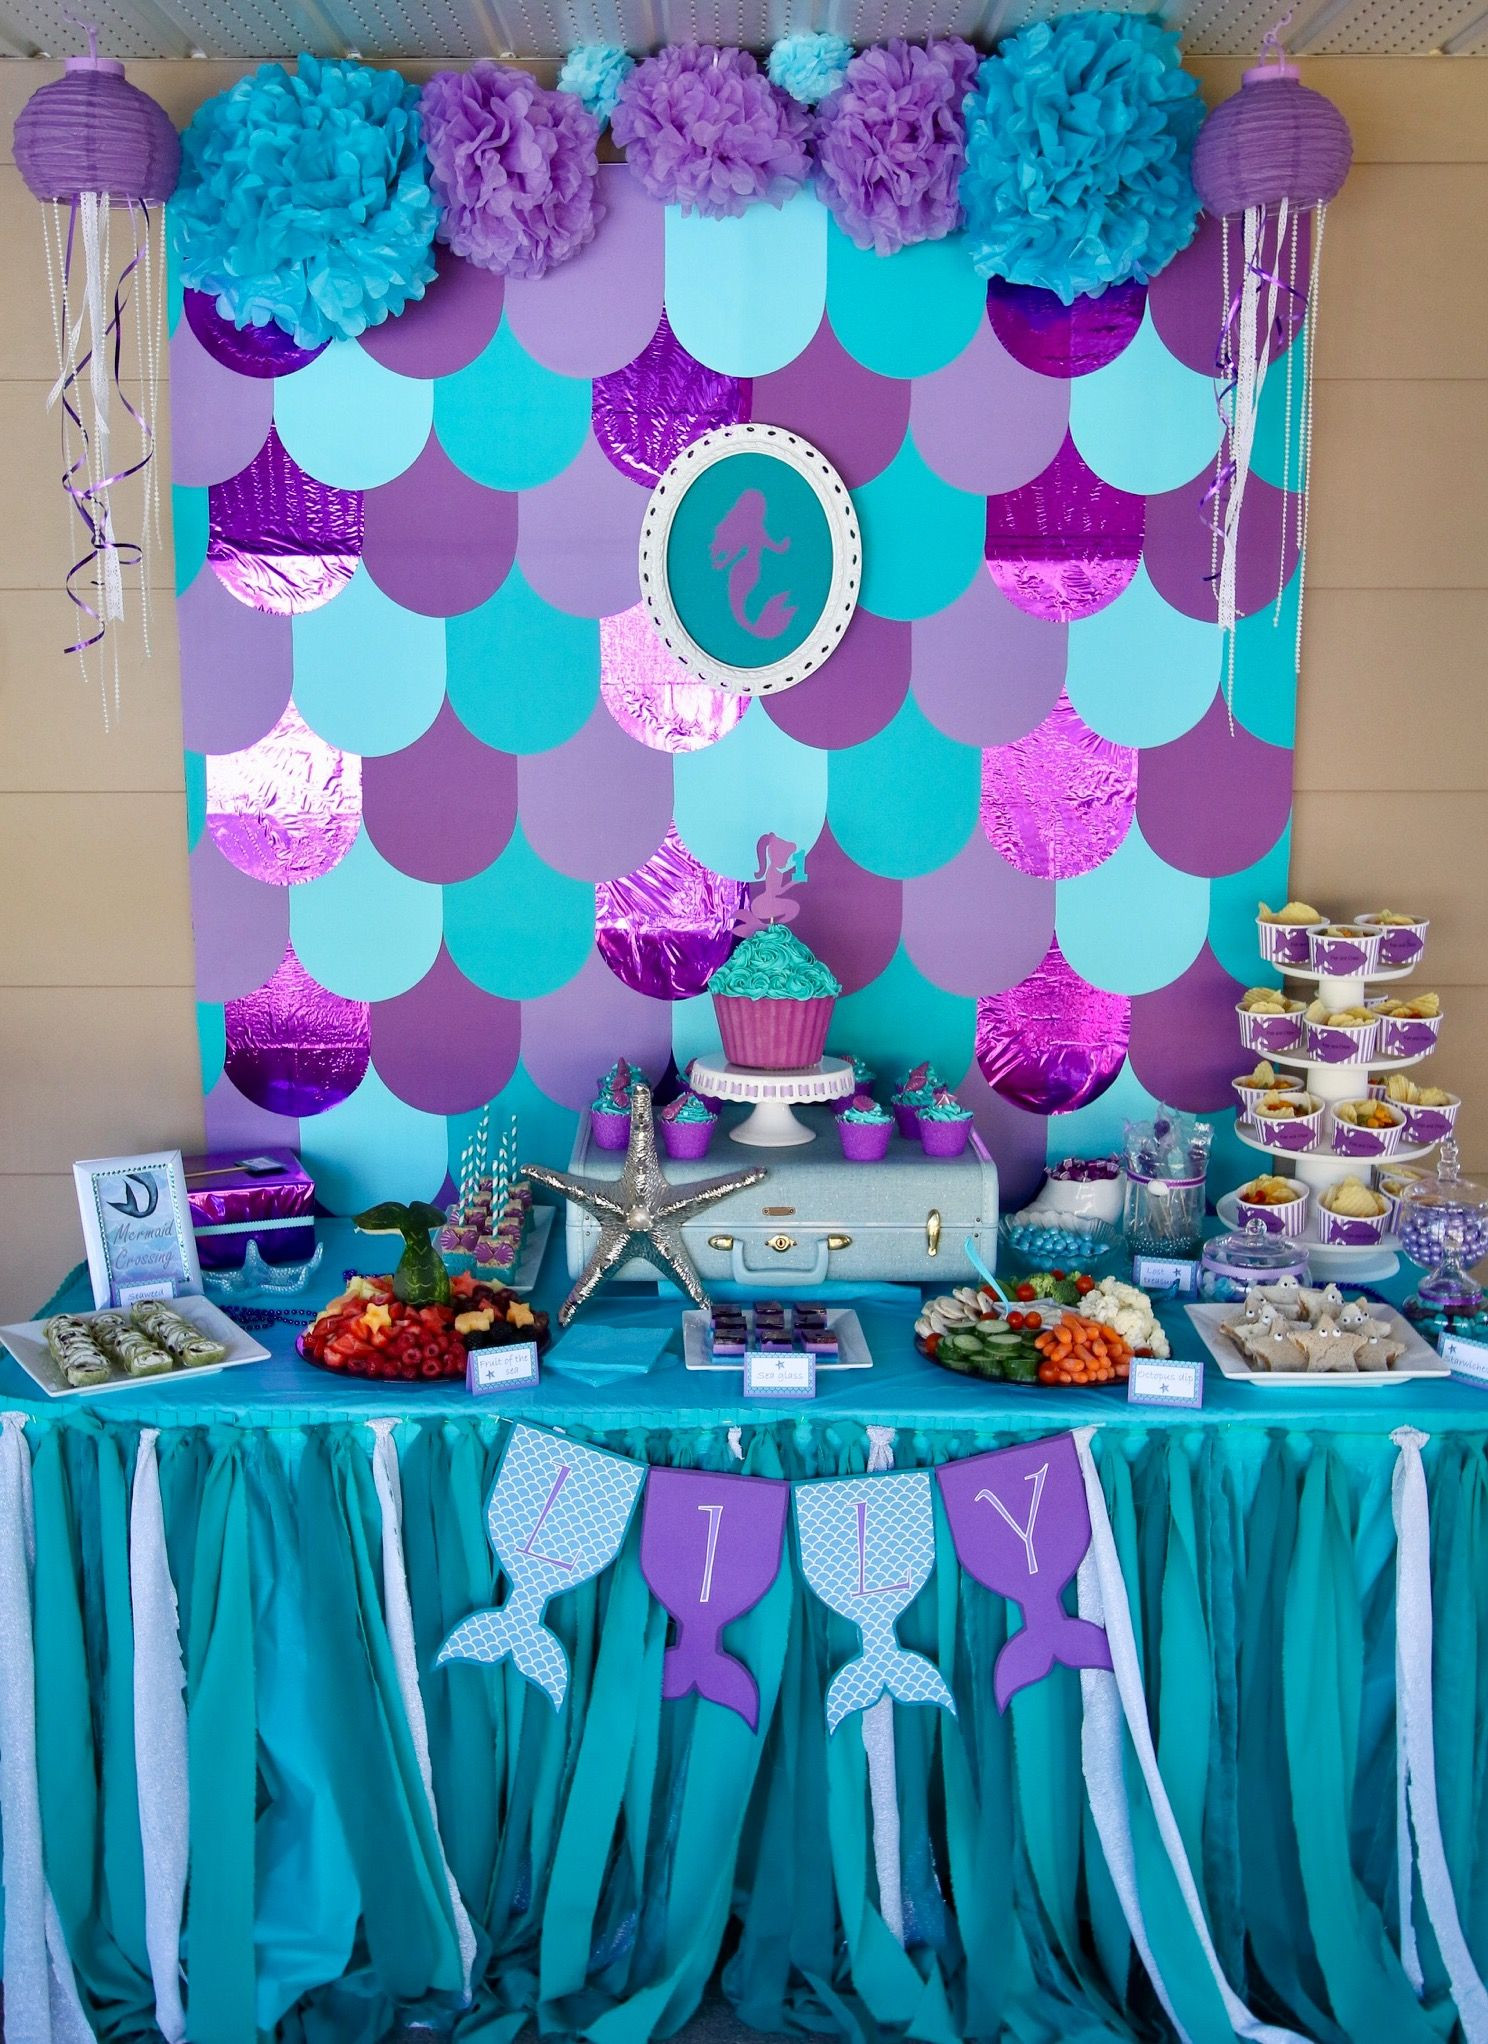 Little Mermaid Party Decoration Ideas
 Mermaid party table decorations Under the sea birthday